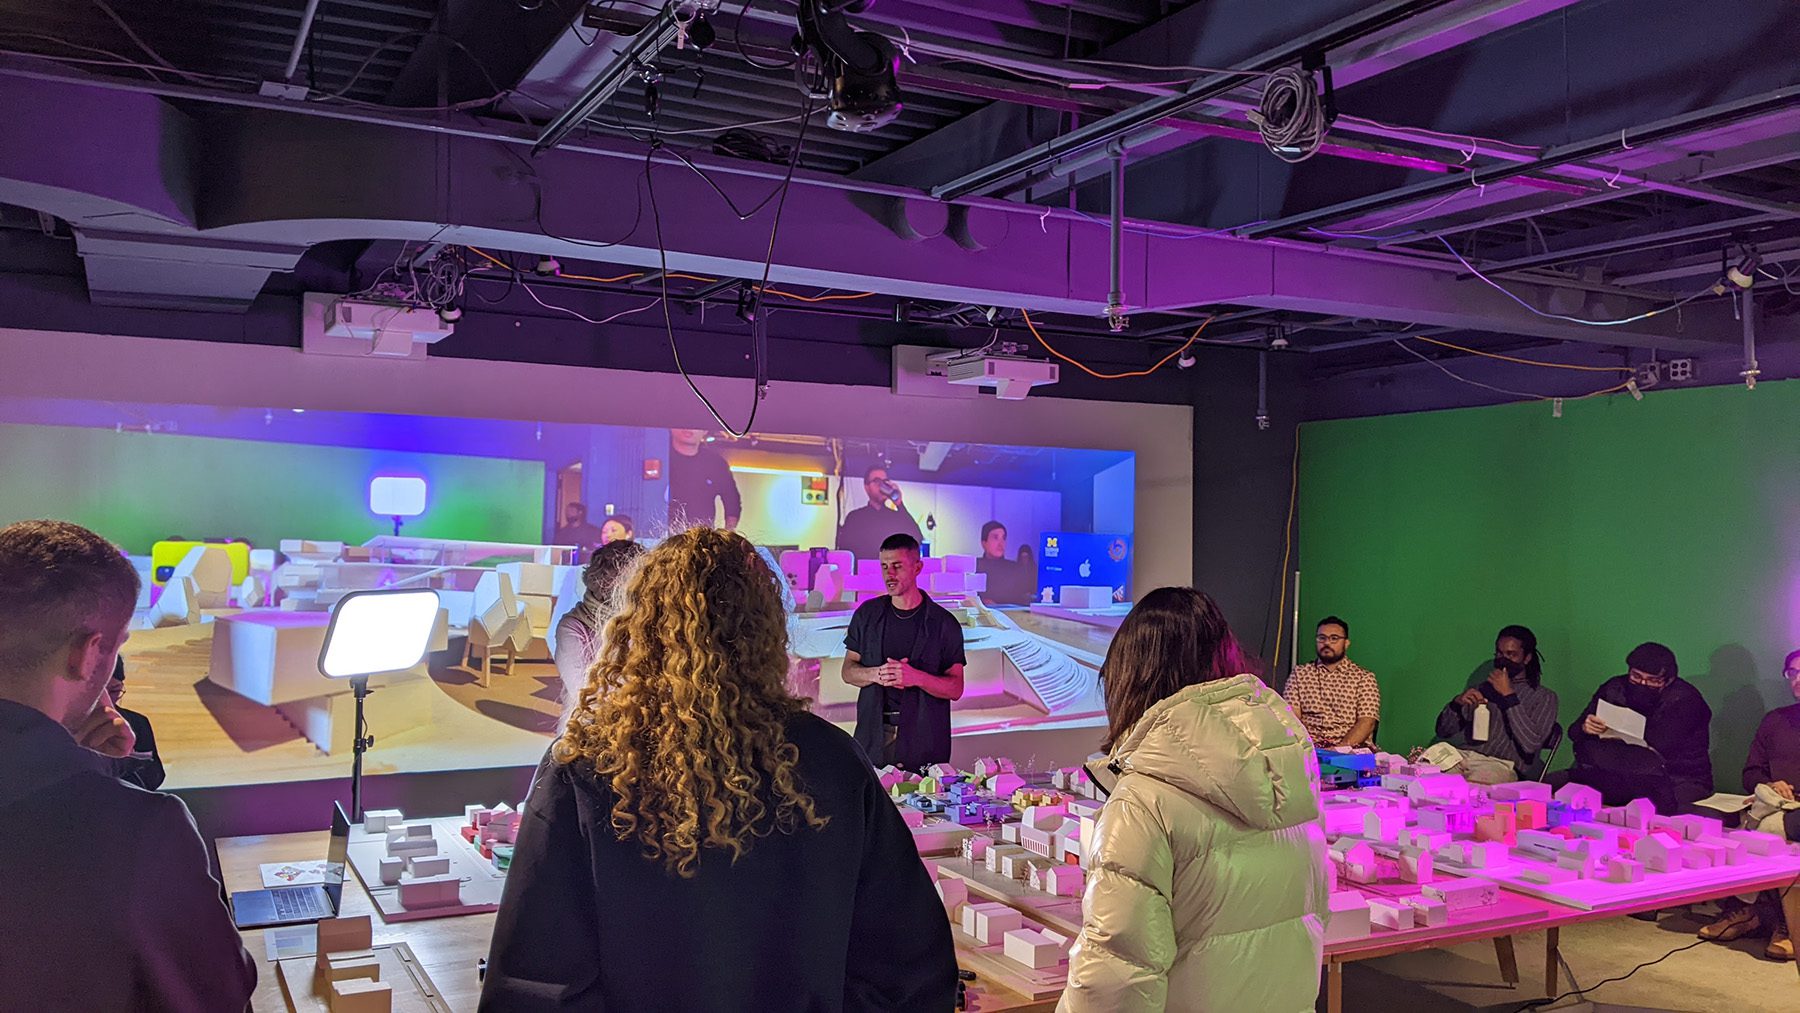 A class gathers around a large model city lit by neon lights in the TVLab